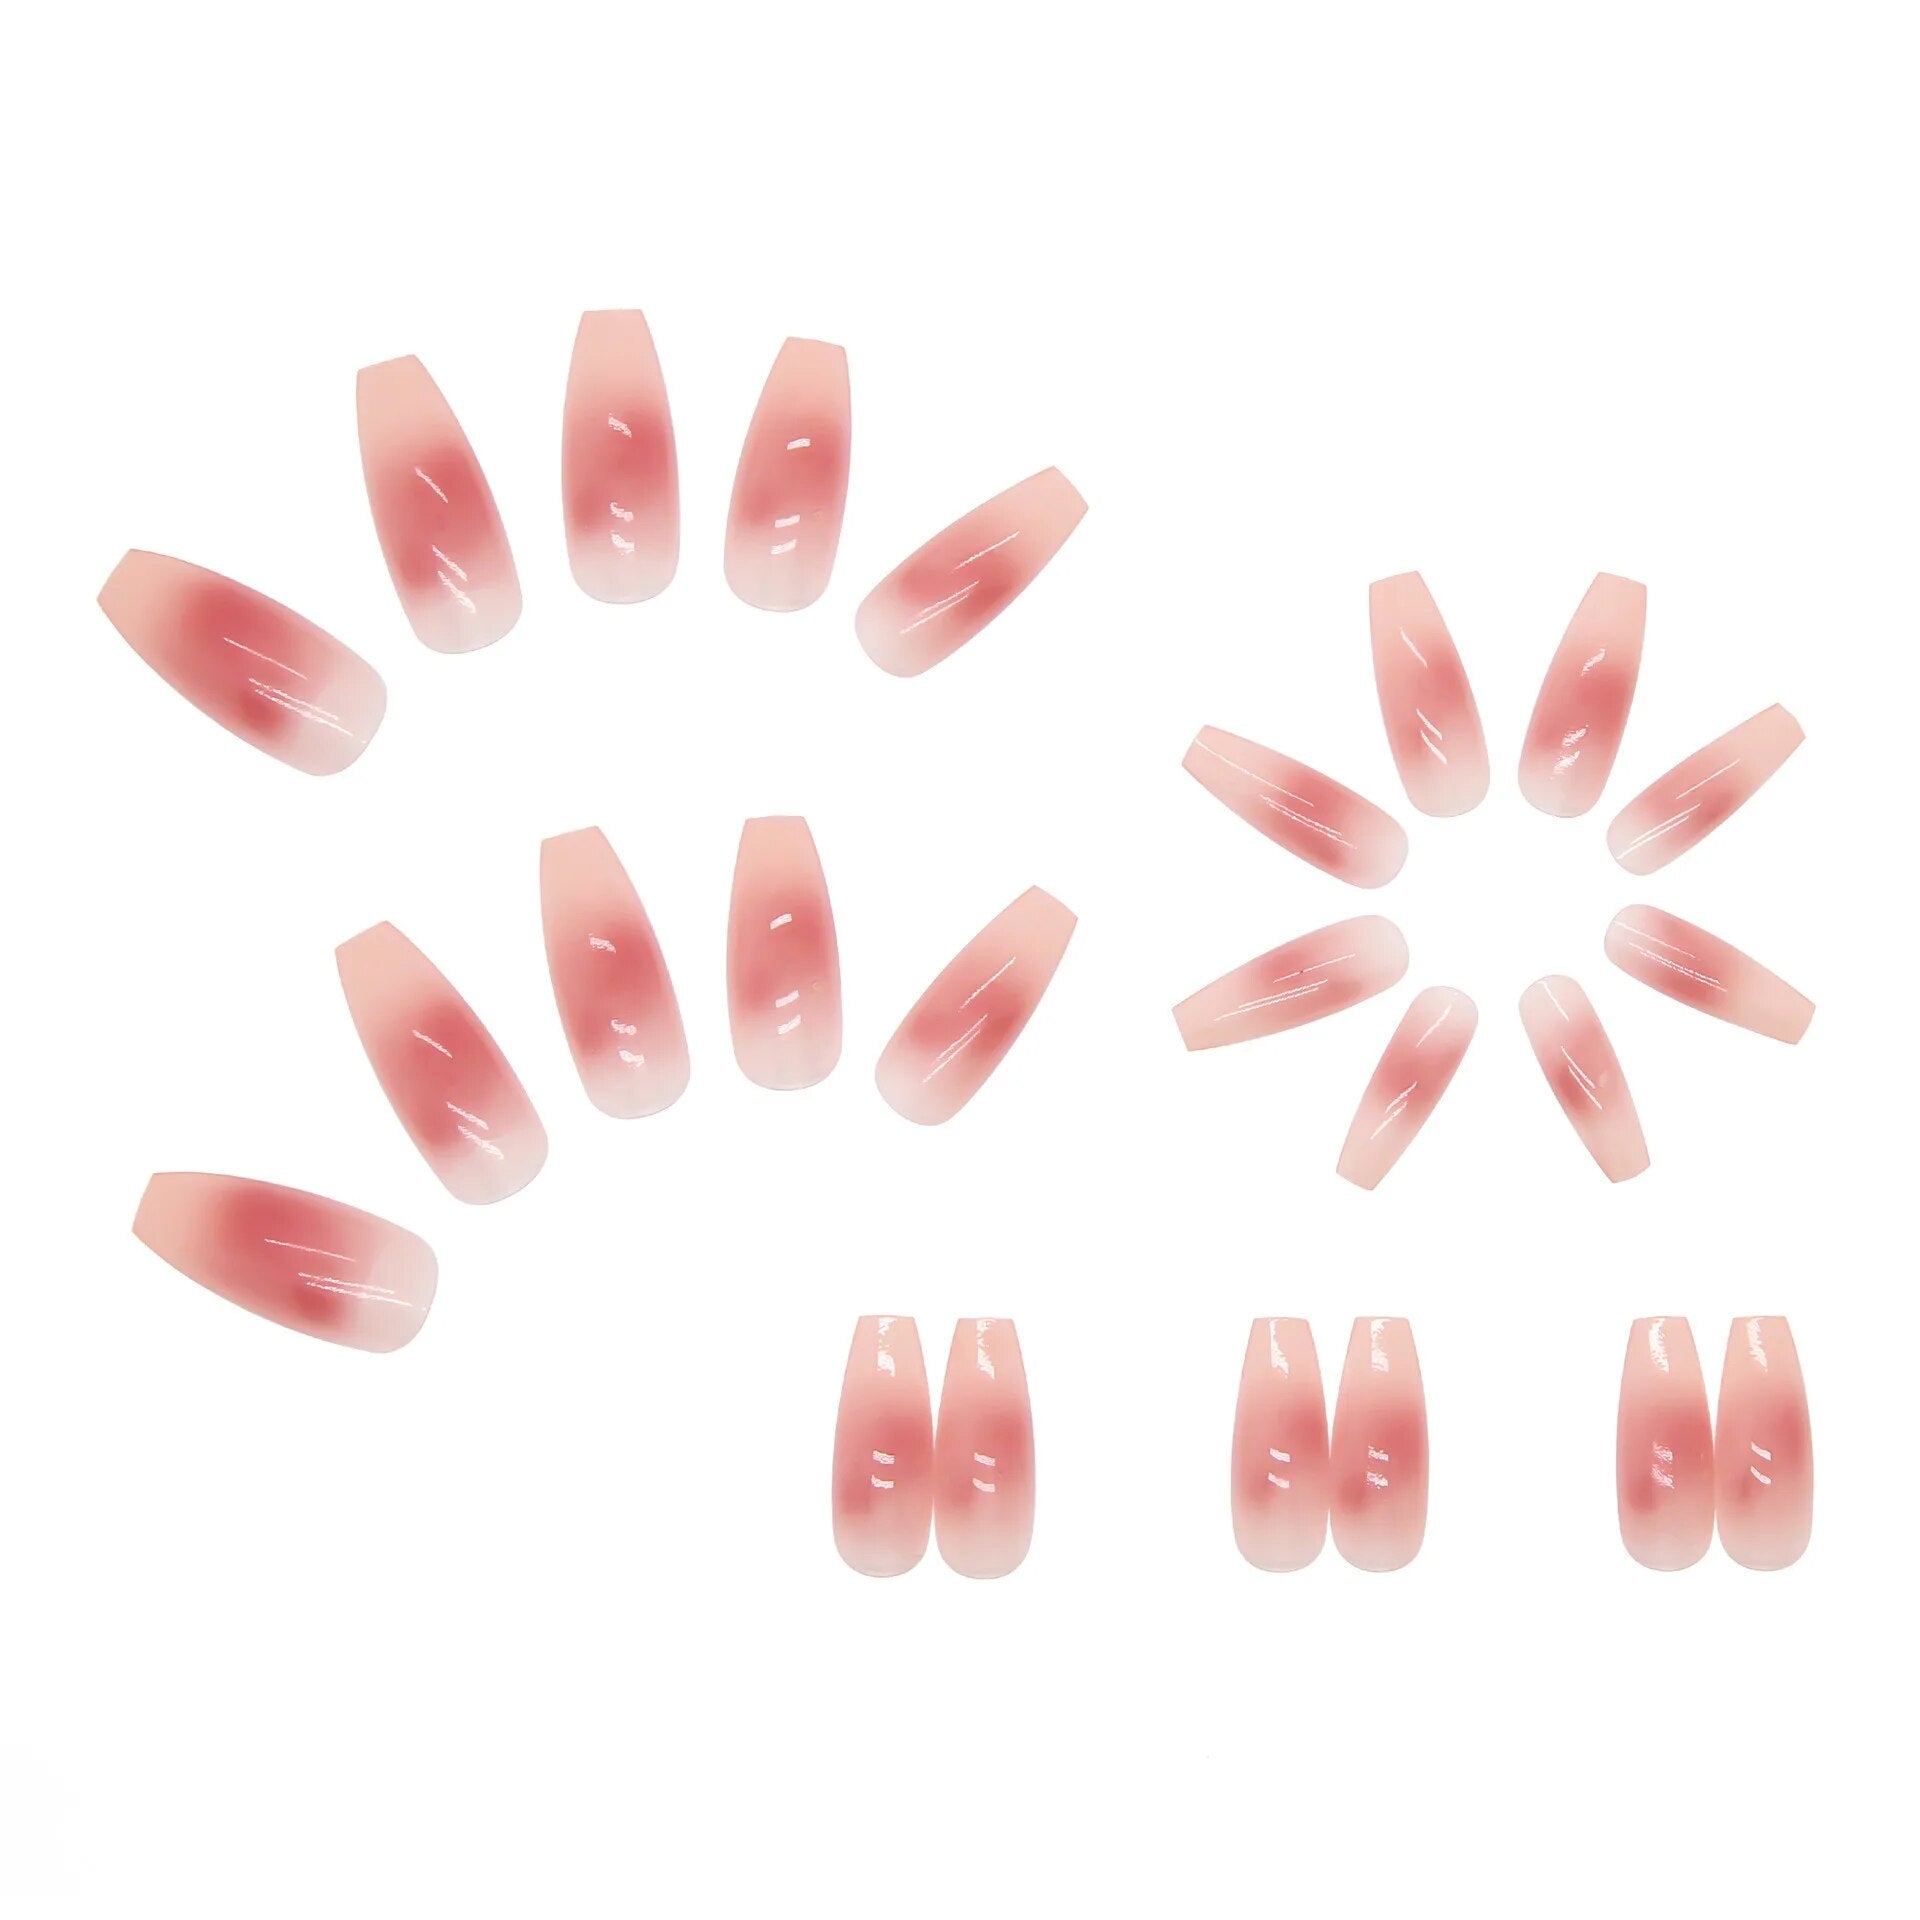 Aovica- 24pcs Detachable Coffin False Nails Wearable French Ballerina Dyed Blush Manicure Fake Nails Full Cover Nail Tips Press On Nails